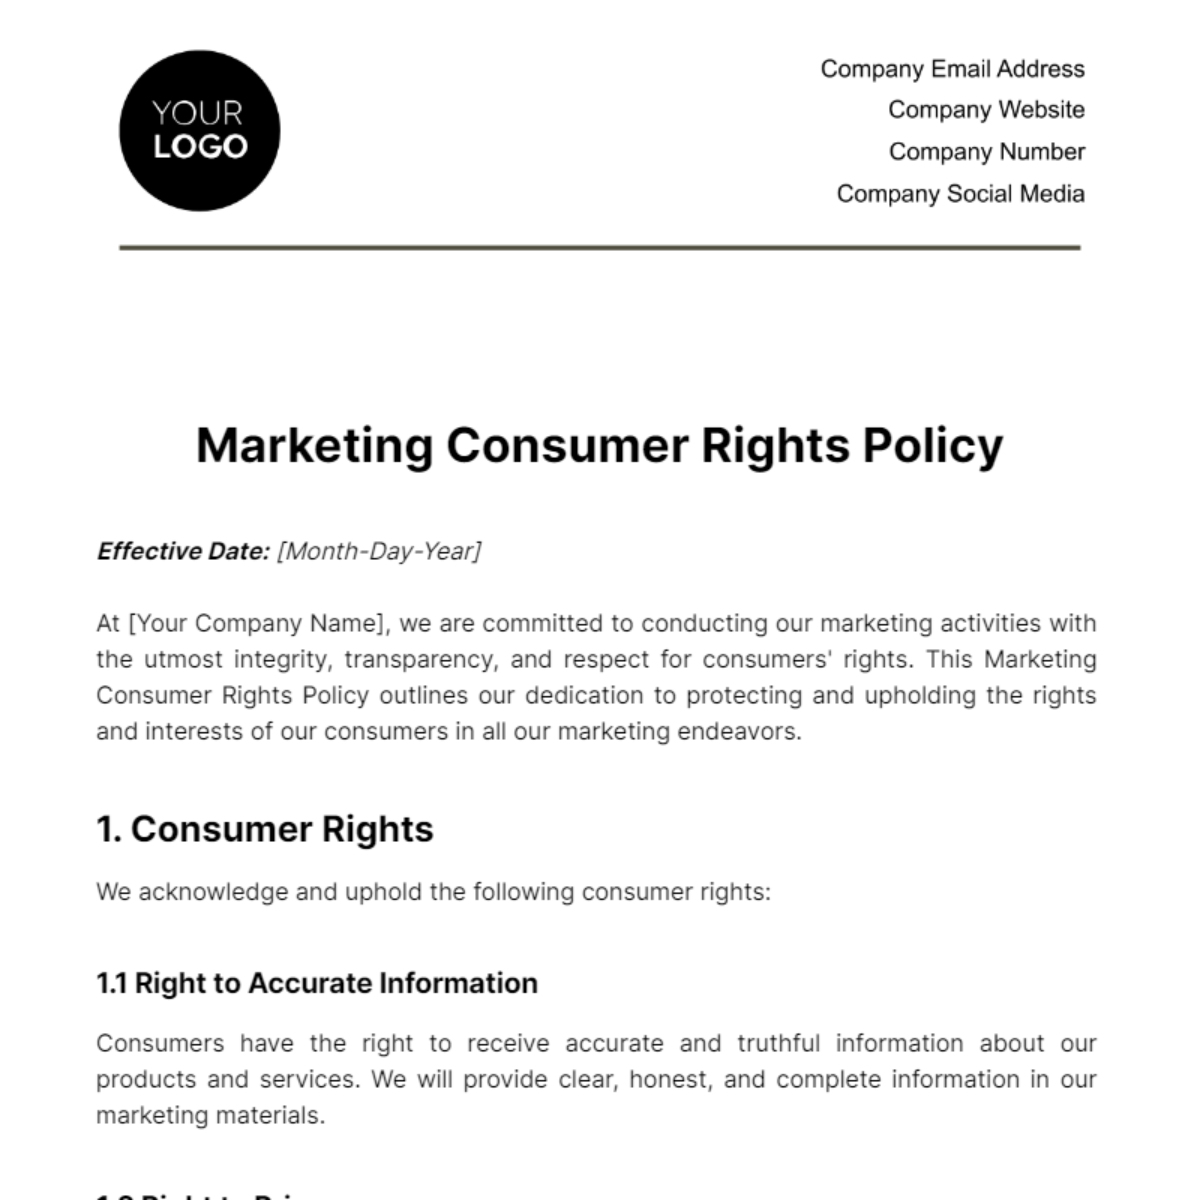 Marketing Consumer Rights Policy Template